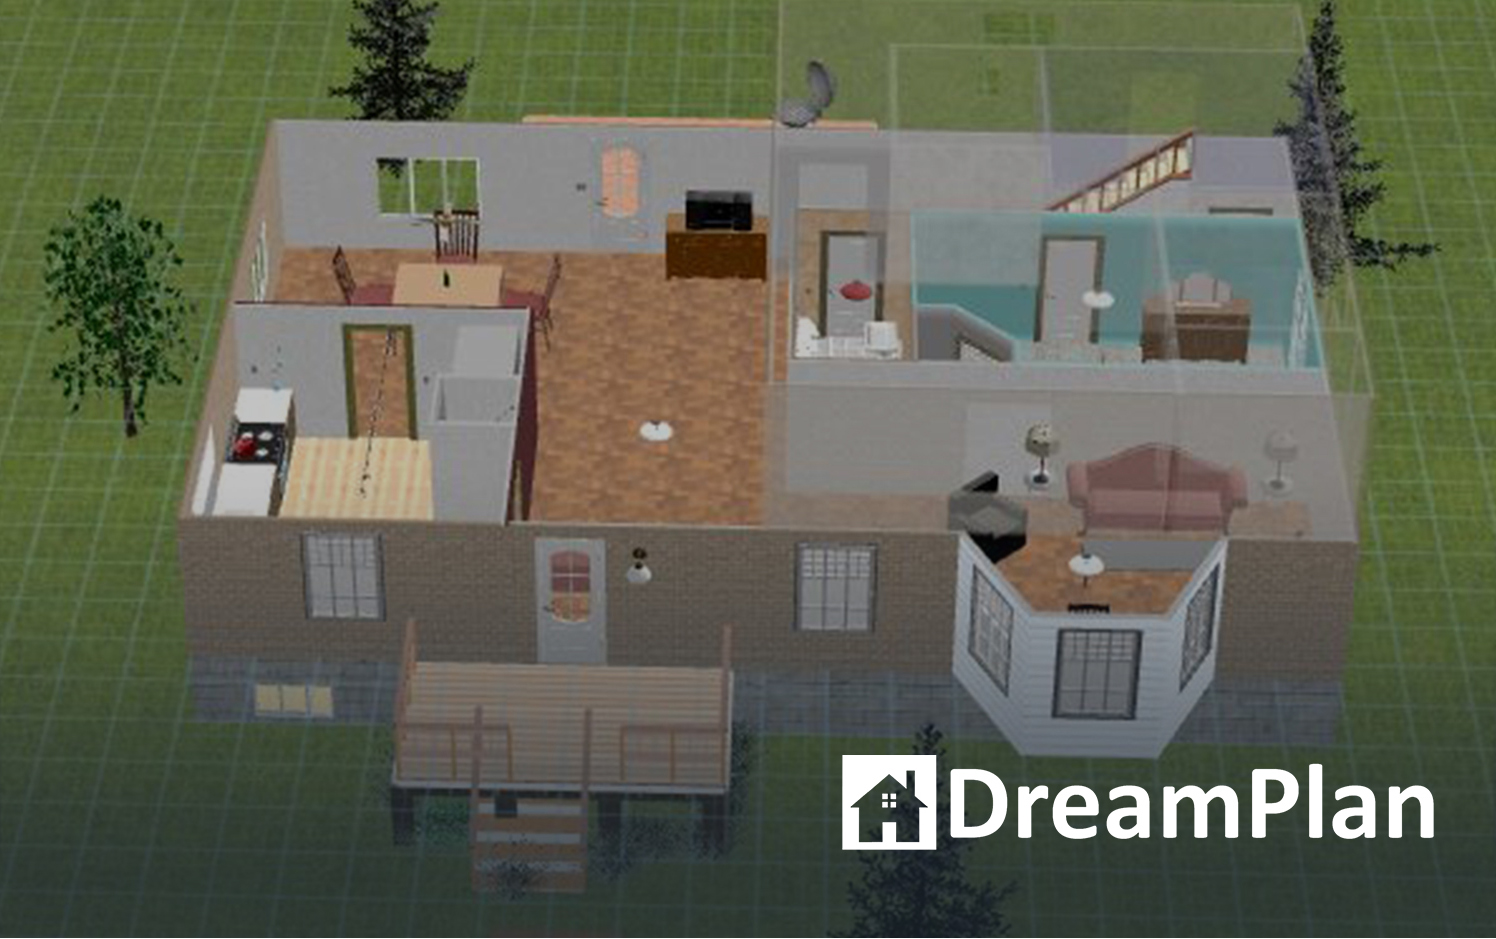 The best home design software: DreamPlan